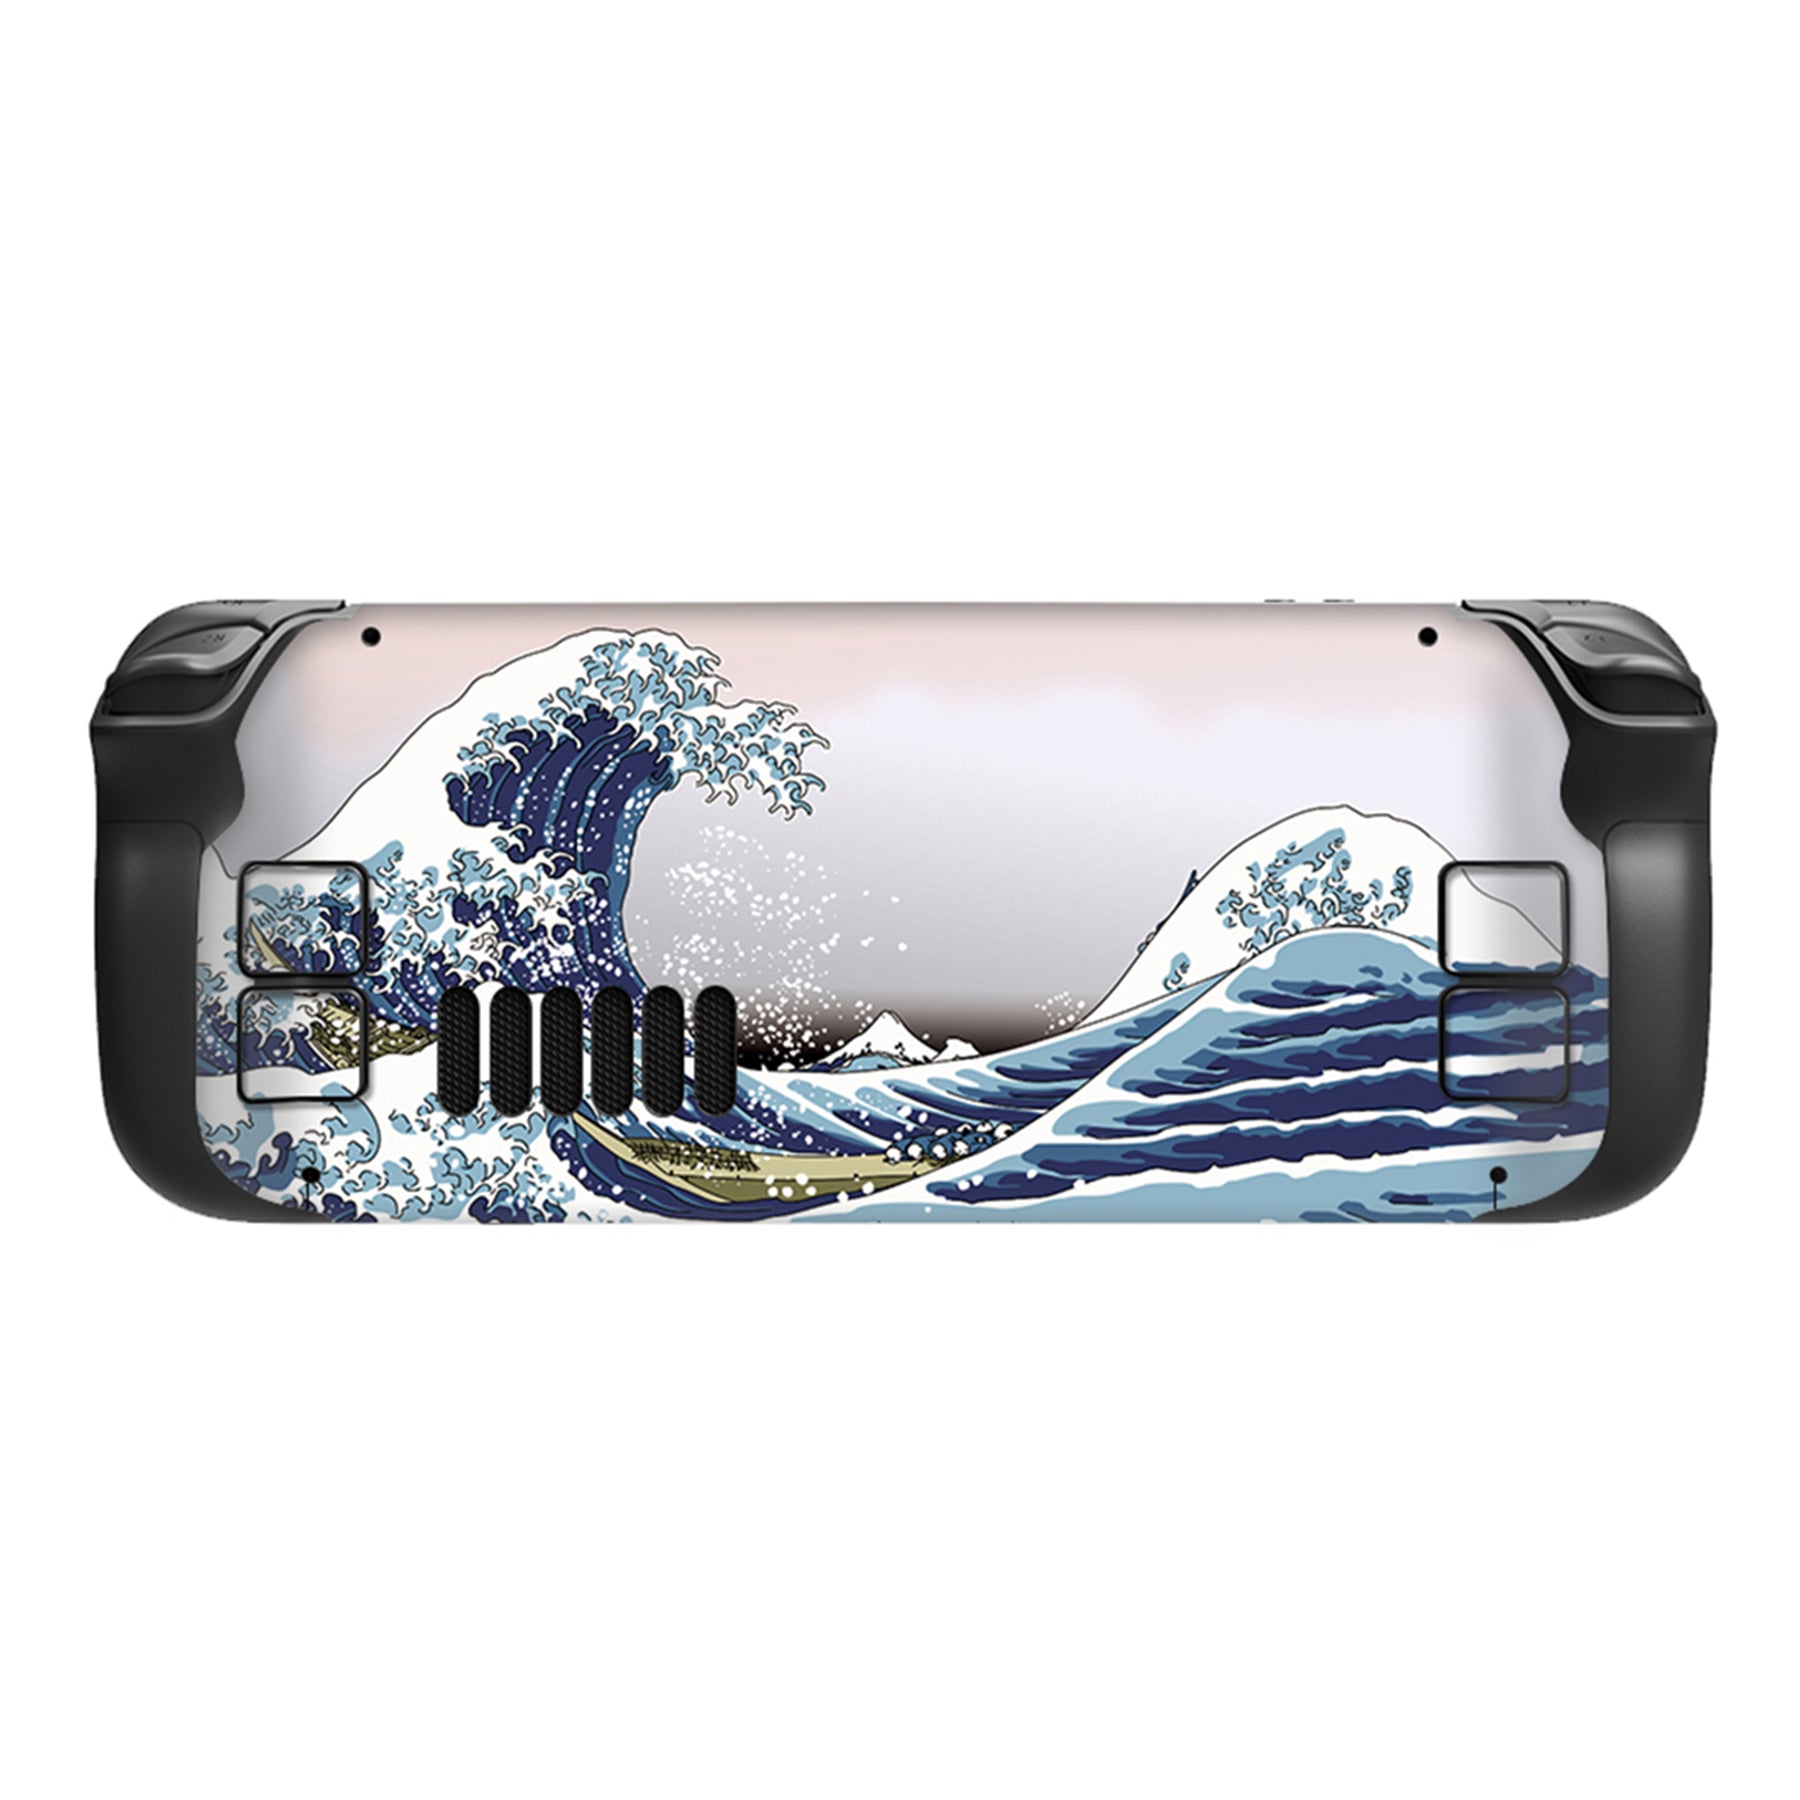 PlayVital Full Set Protective Skin Decal for Steam Deck, Custom Stickers Vinyl Cover for Steam Deck Handheld Gaming PC - The Great Wave - SDTM008 playvital